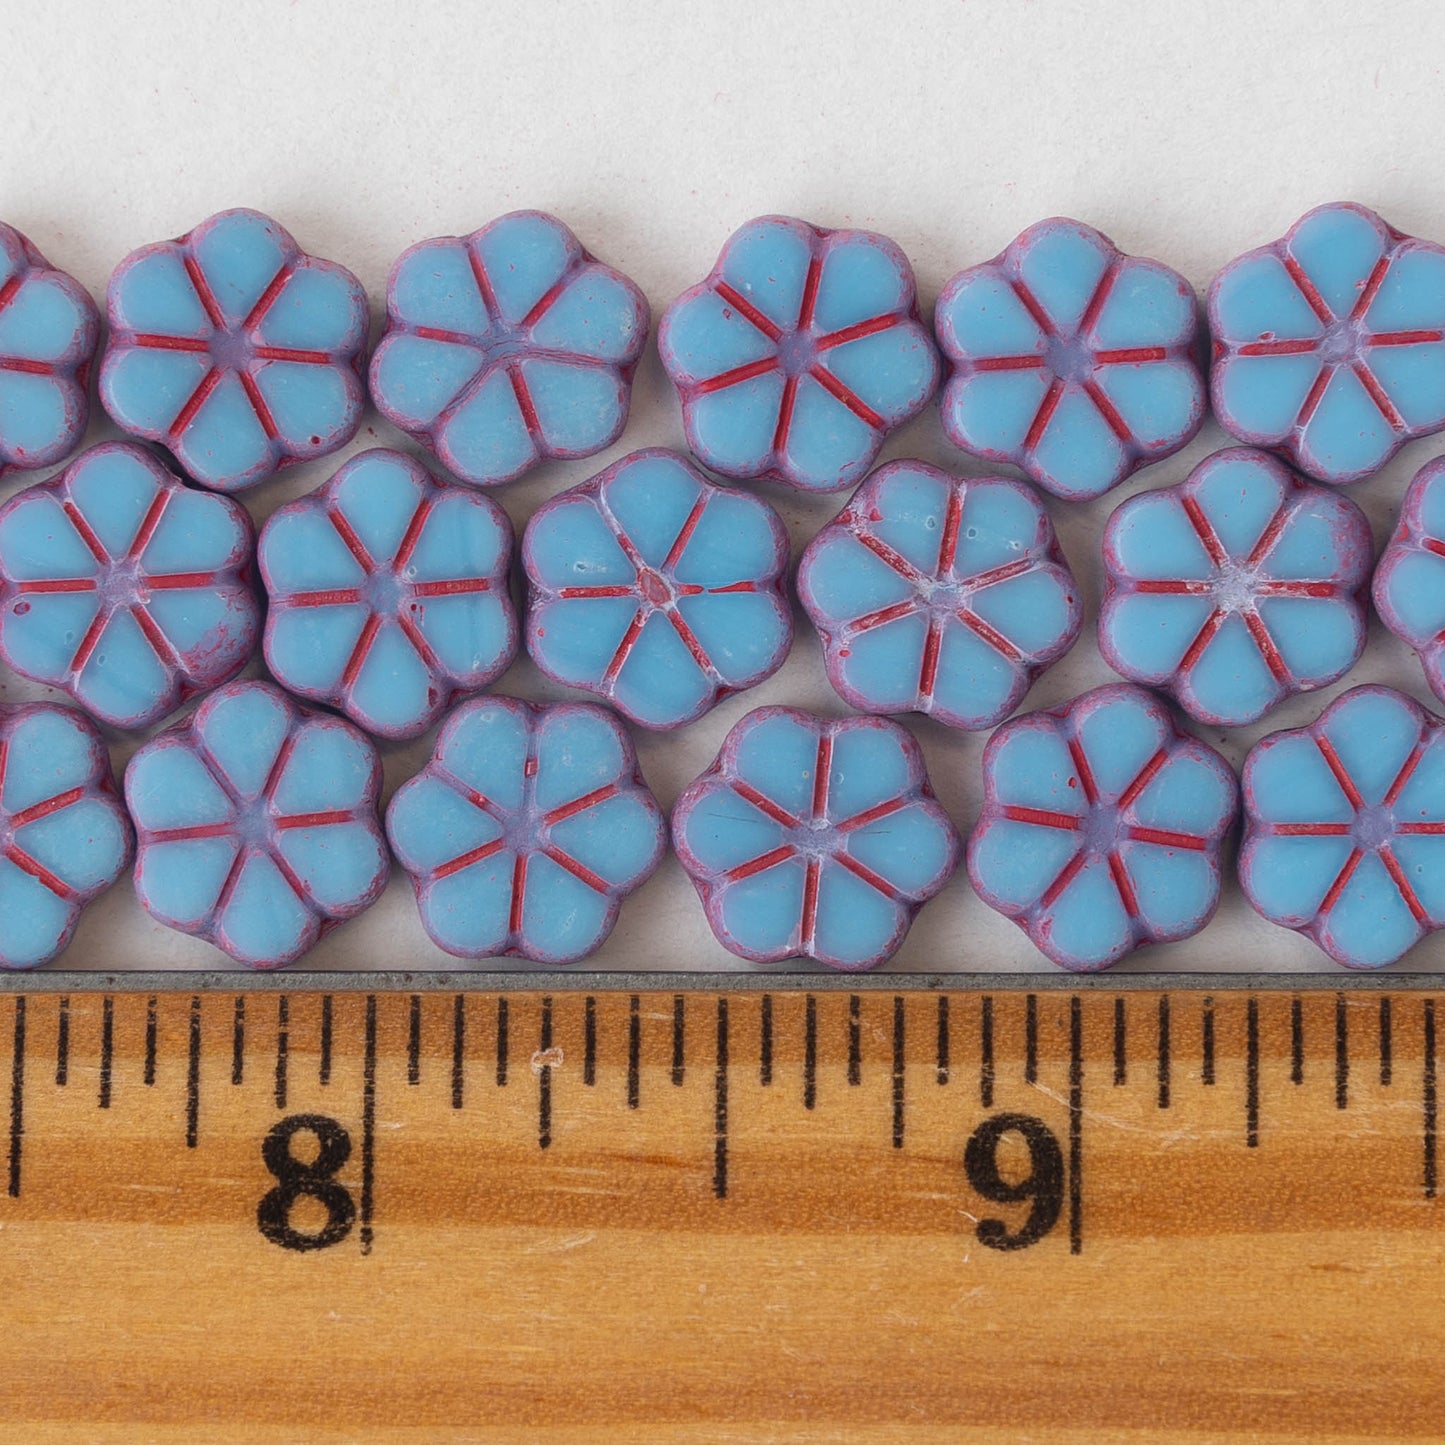 10mm Flower Beads - Opaque Aqua Blue with Pink Wash - 10